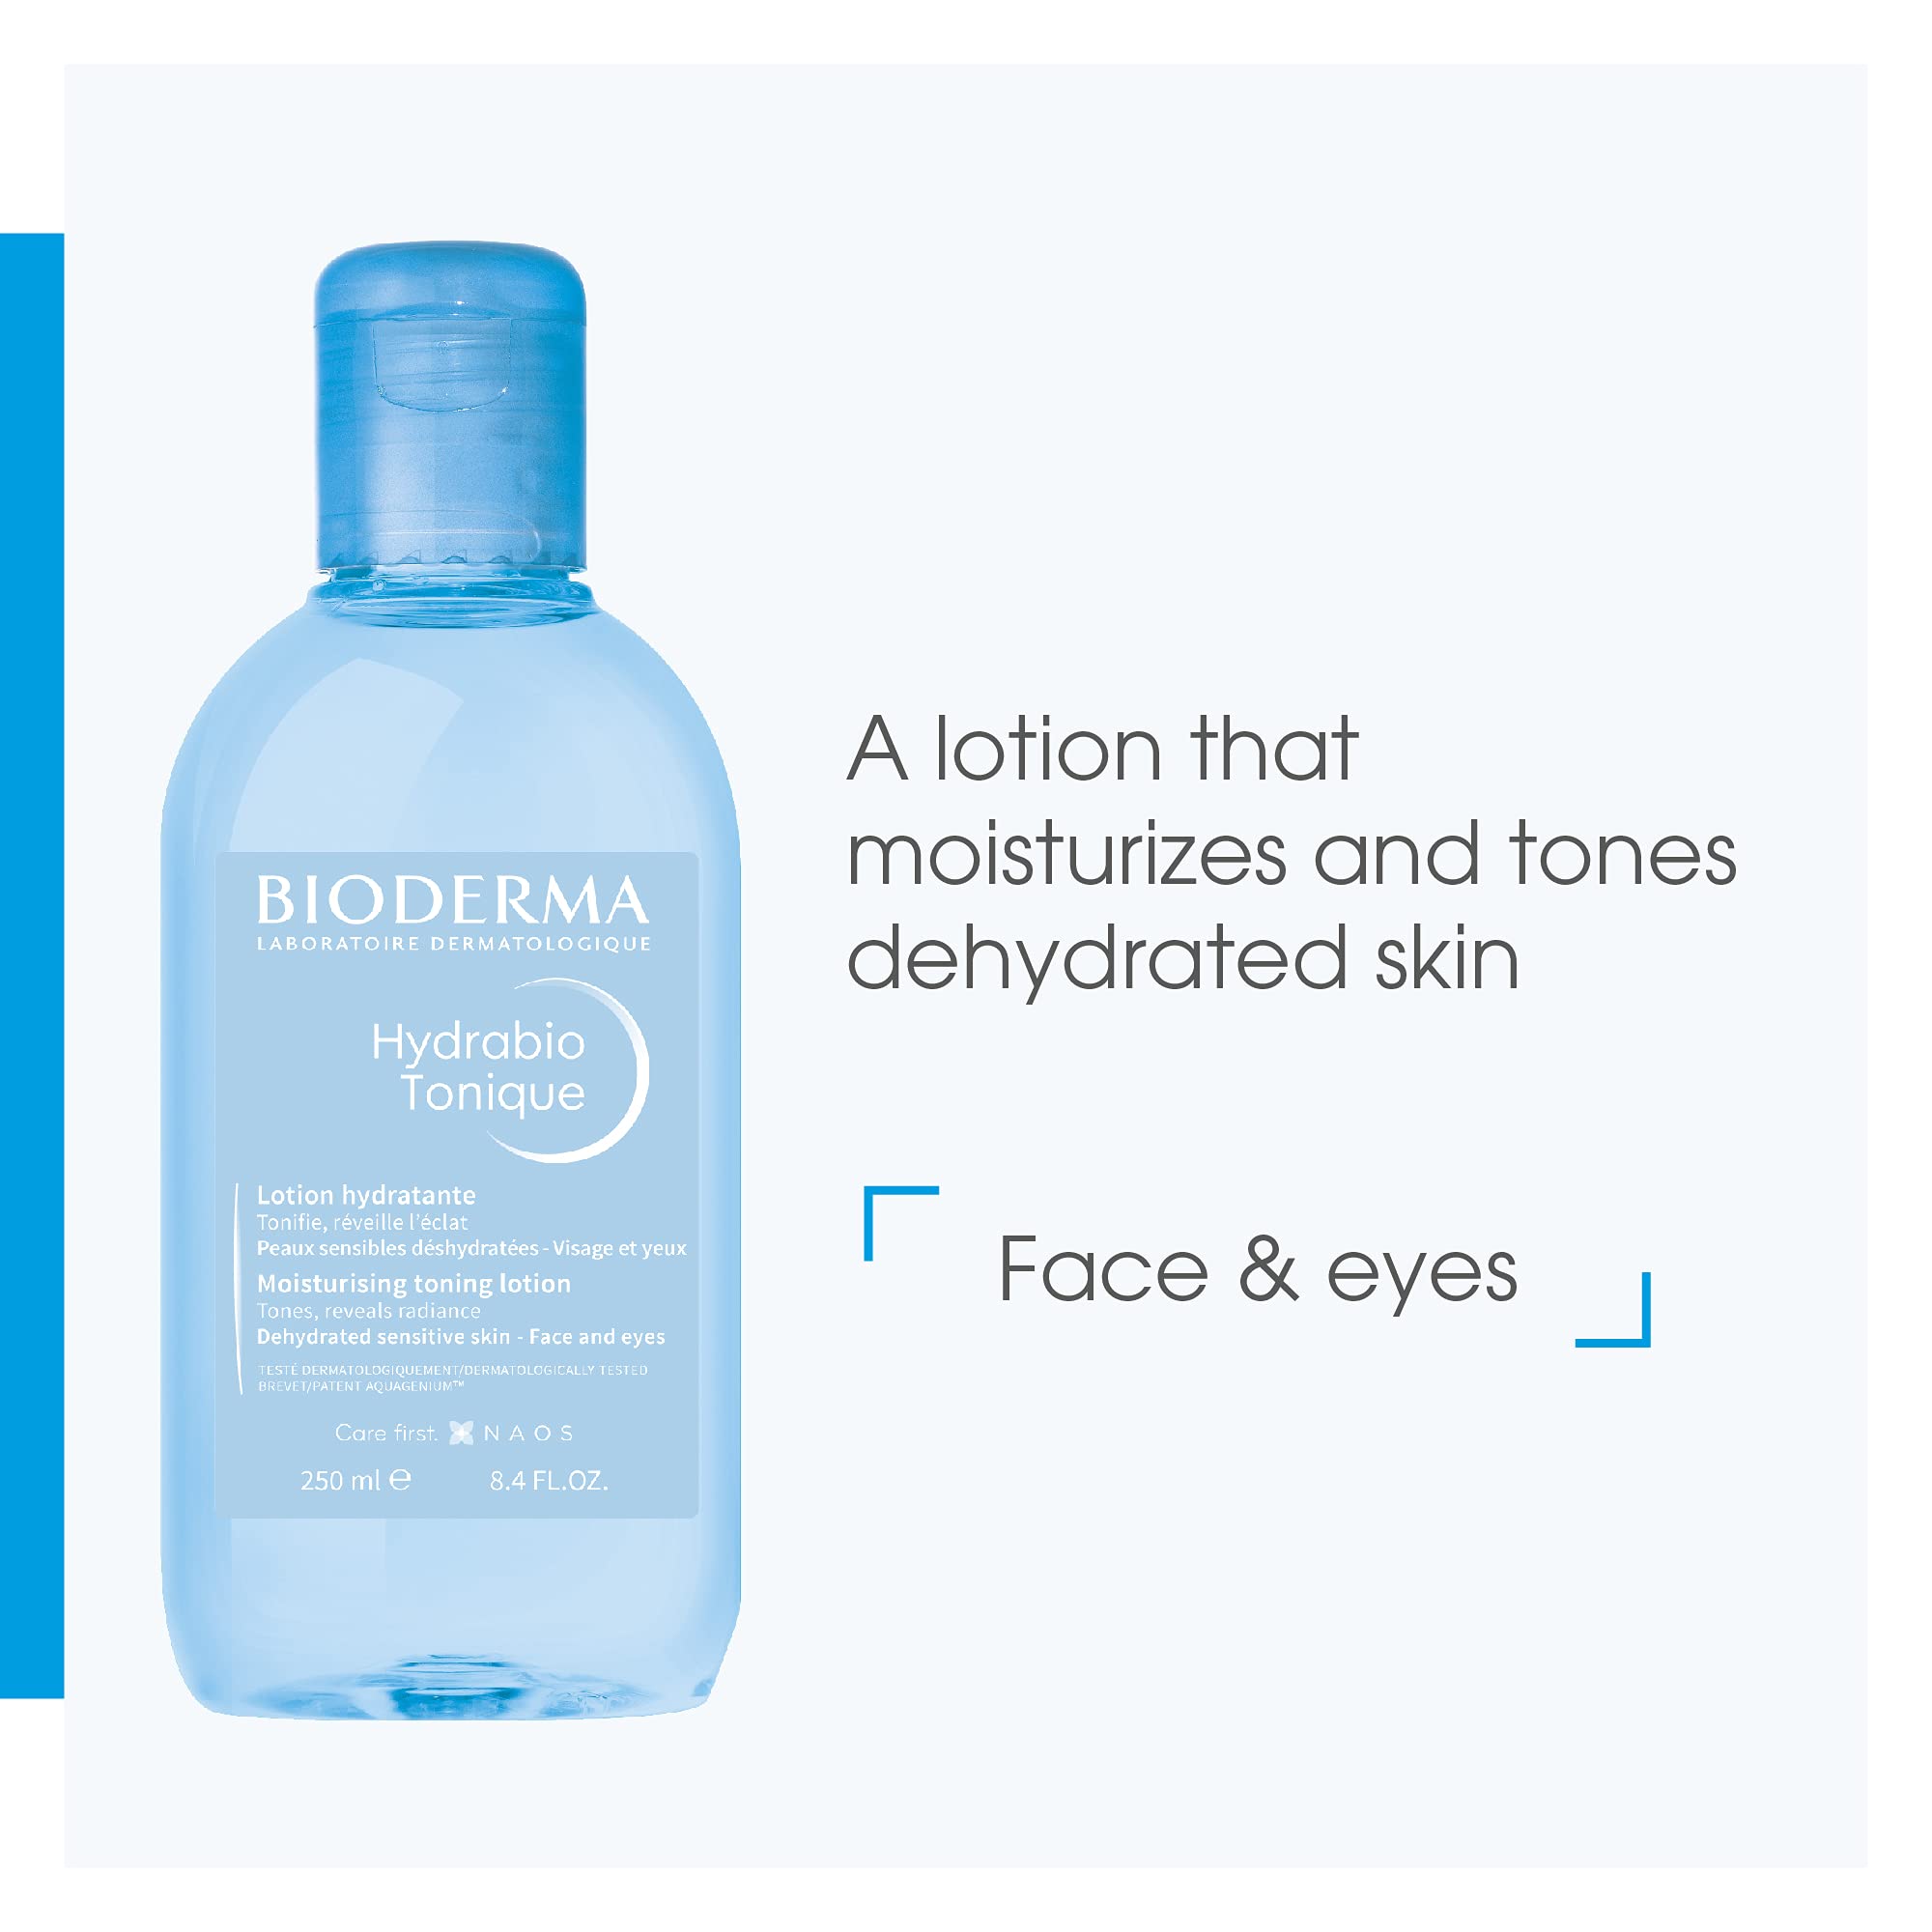 Bioderma - Hydrabio - Tonic Lotion - Hydrating Facial Lotion - Climate Pledge Friendly - Face Lotion for Sensitive Dry Skin 8.45 Fl Oz (Pack of 1)